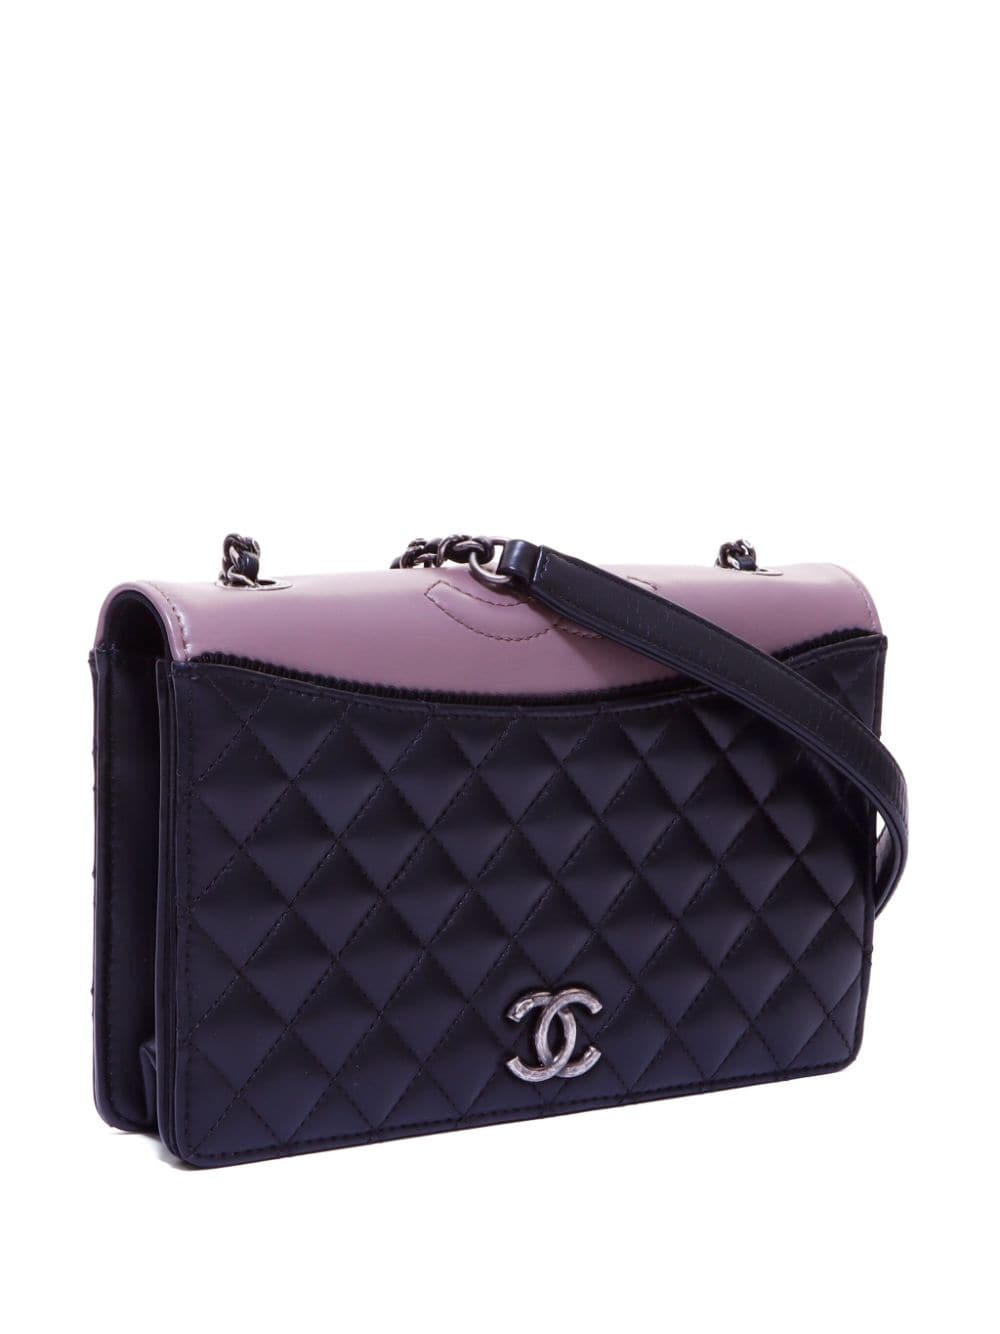 Pre-owned Chanel 2016-2017 Cc Shoulder Bag In Purple